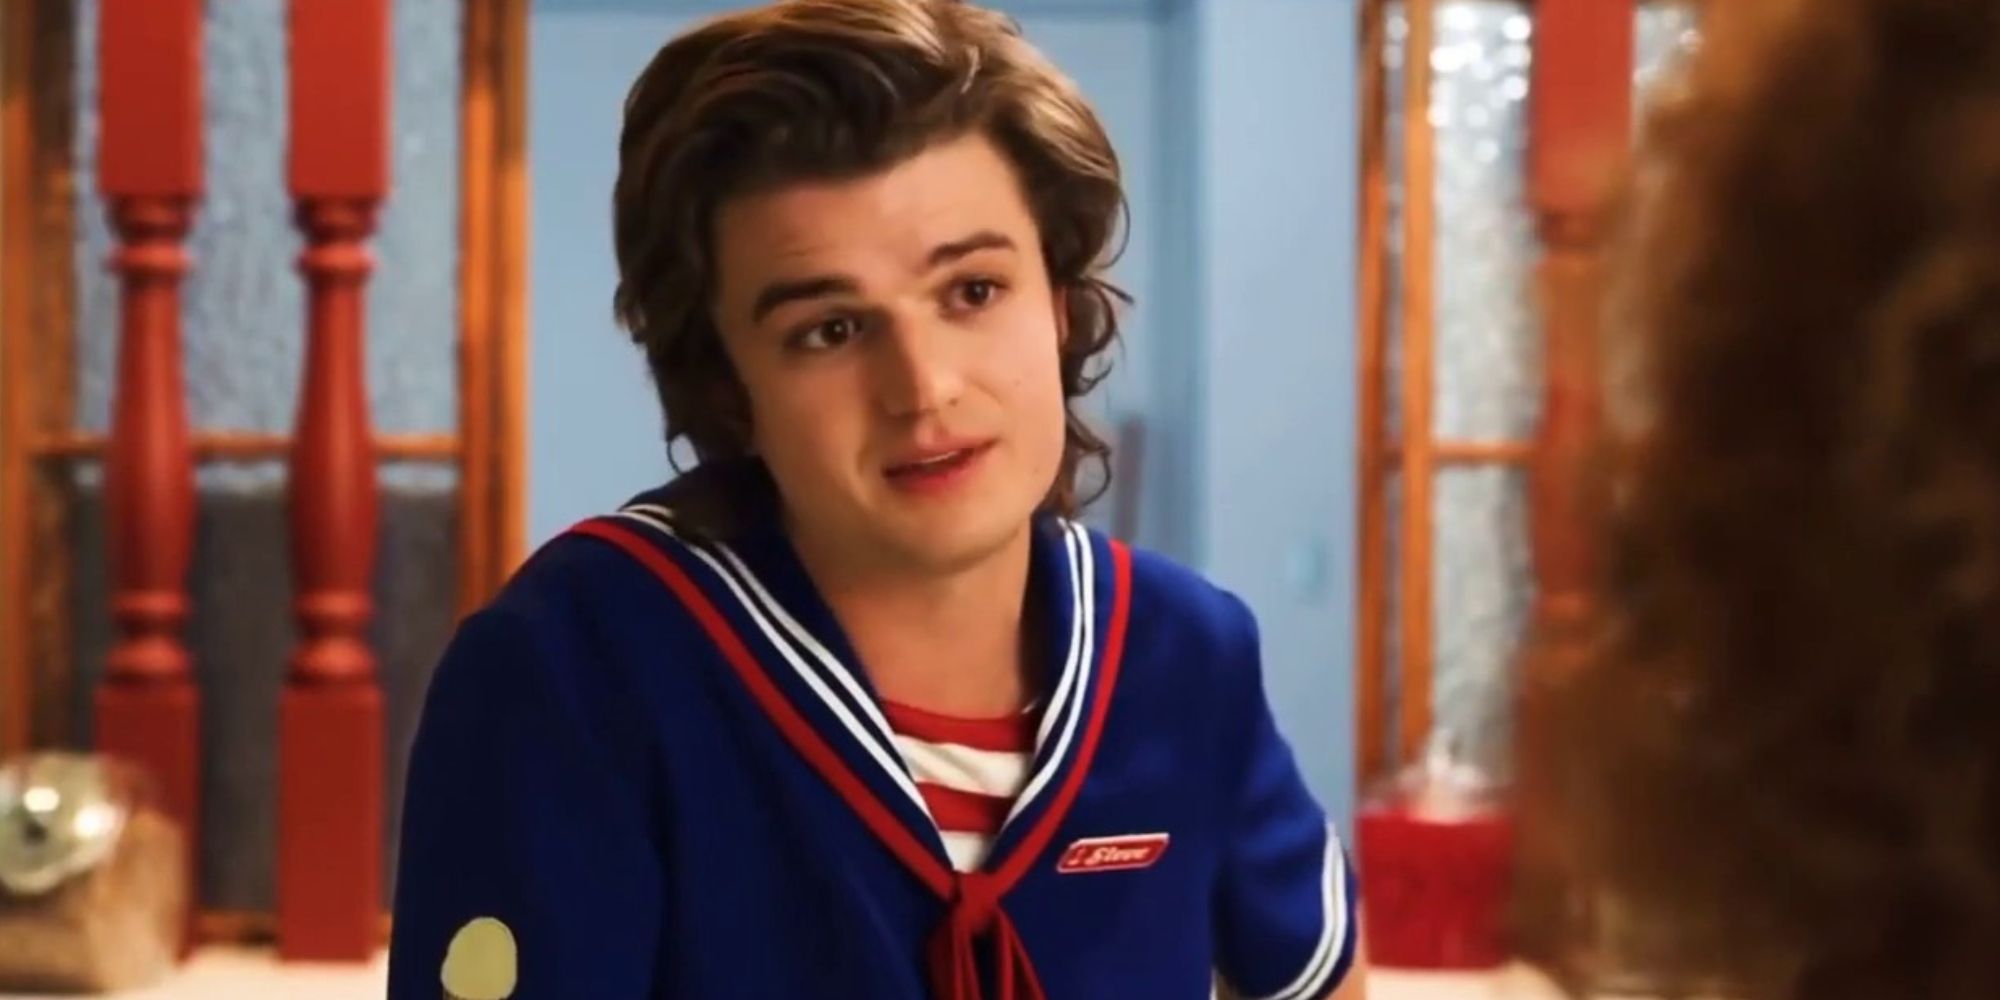 Steve introduces himself to a group of women while wrking at Scoops Ahoy in Stranger Things